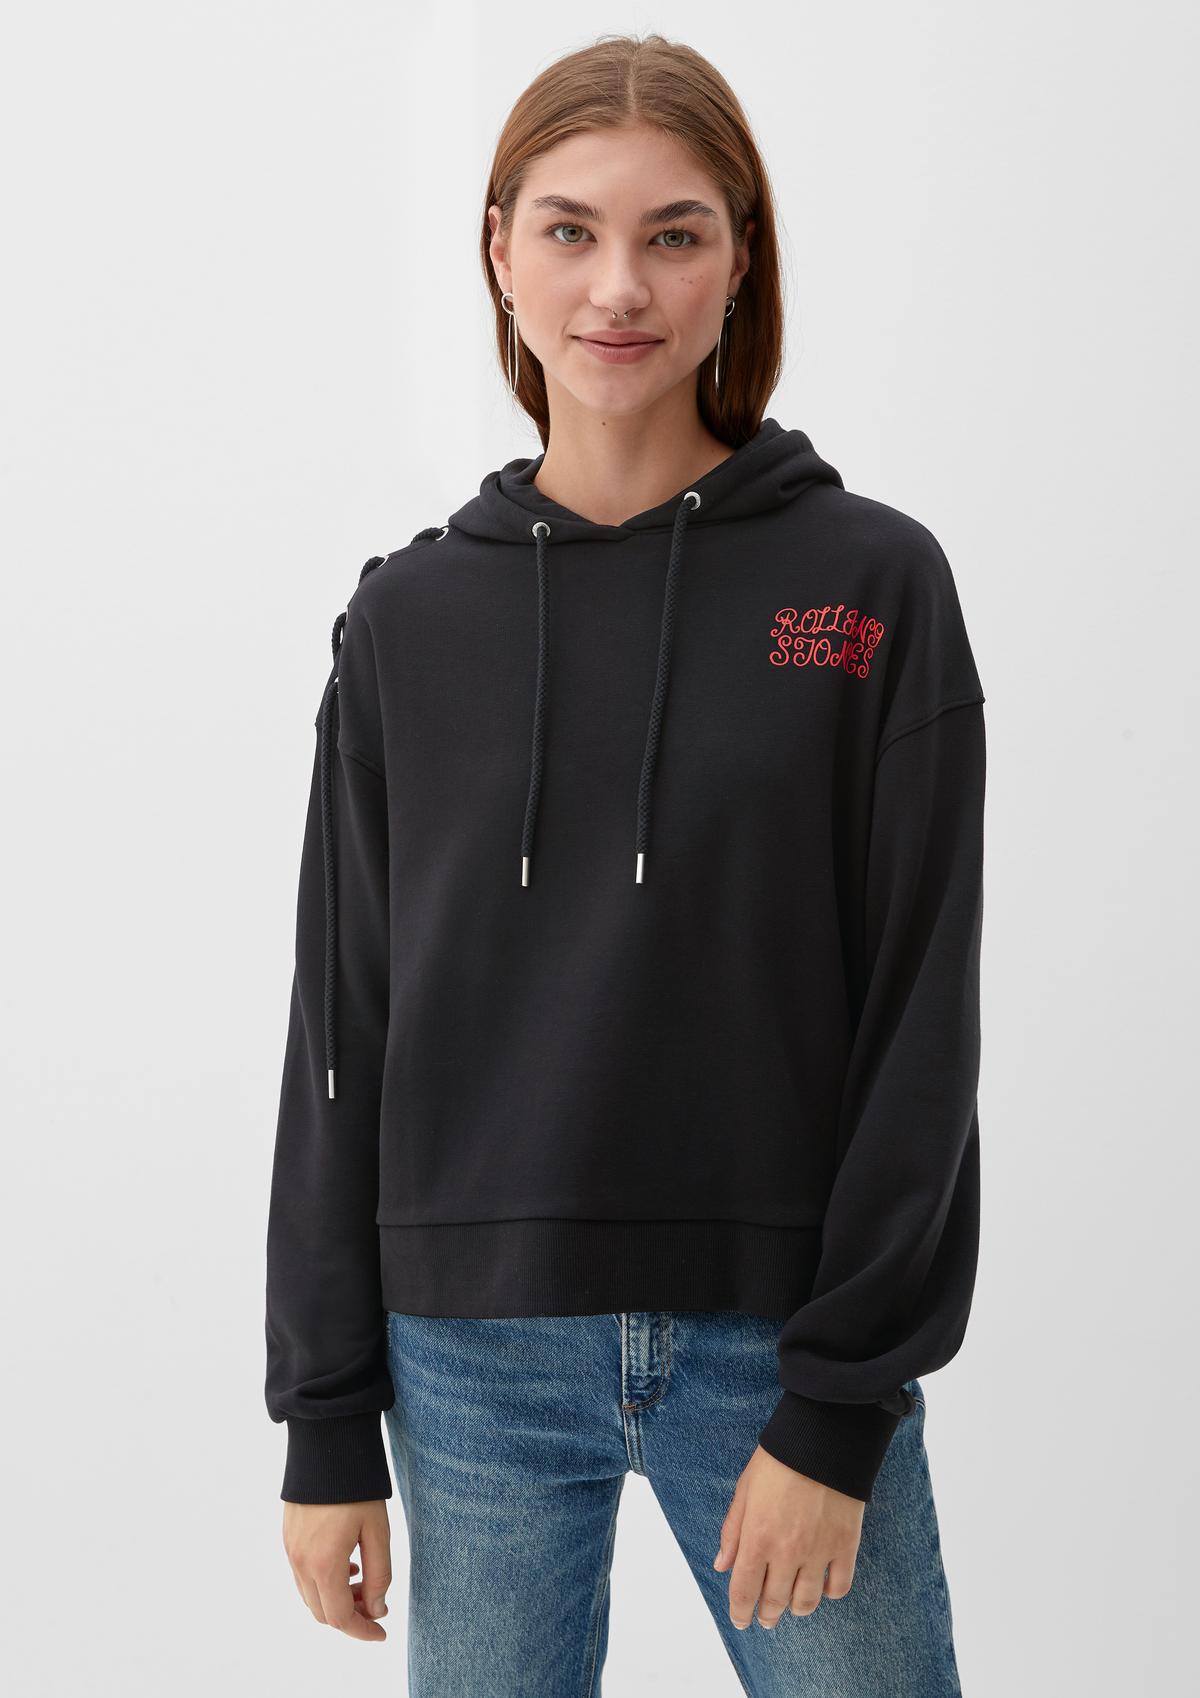 s.Oliver Hoodie with a Rolling Stones print